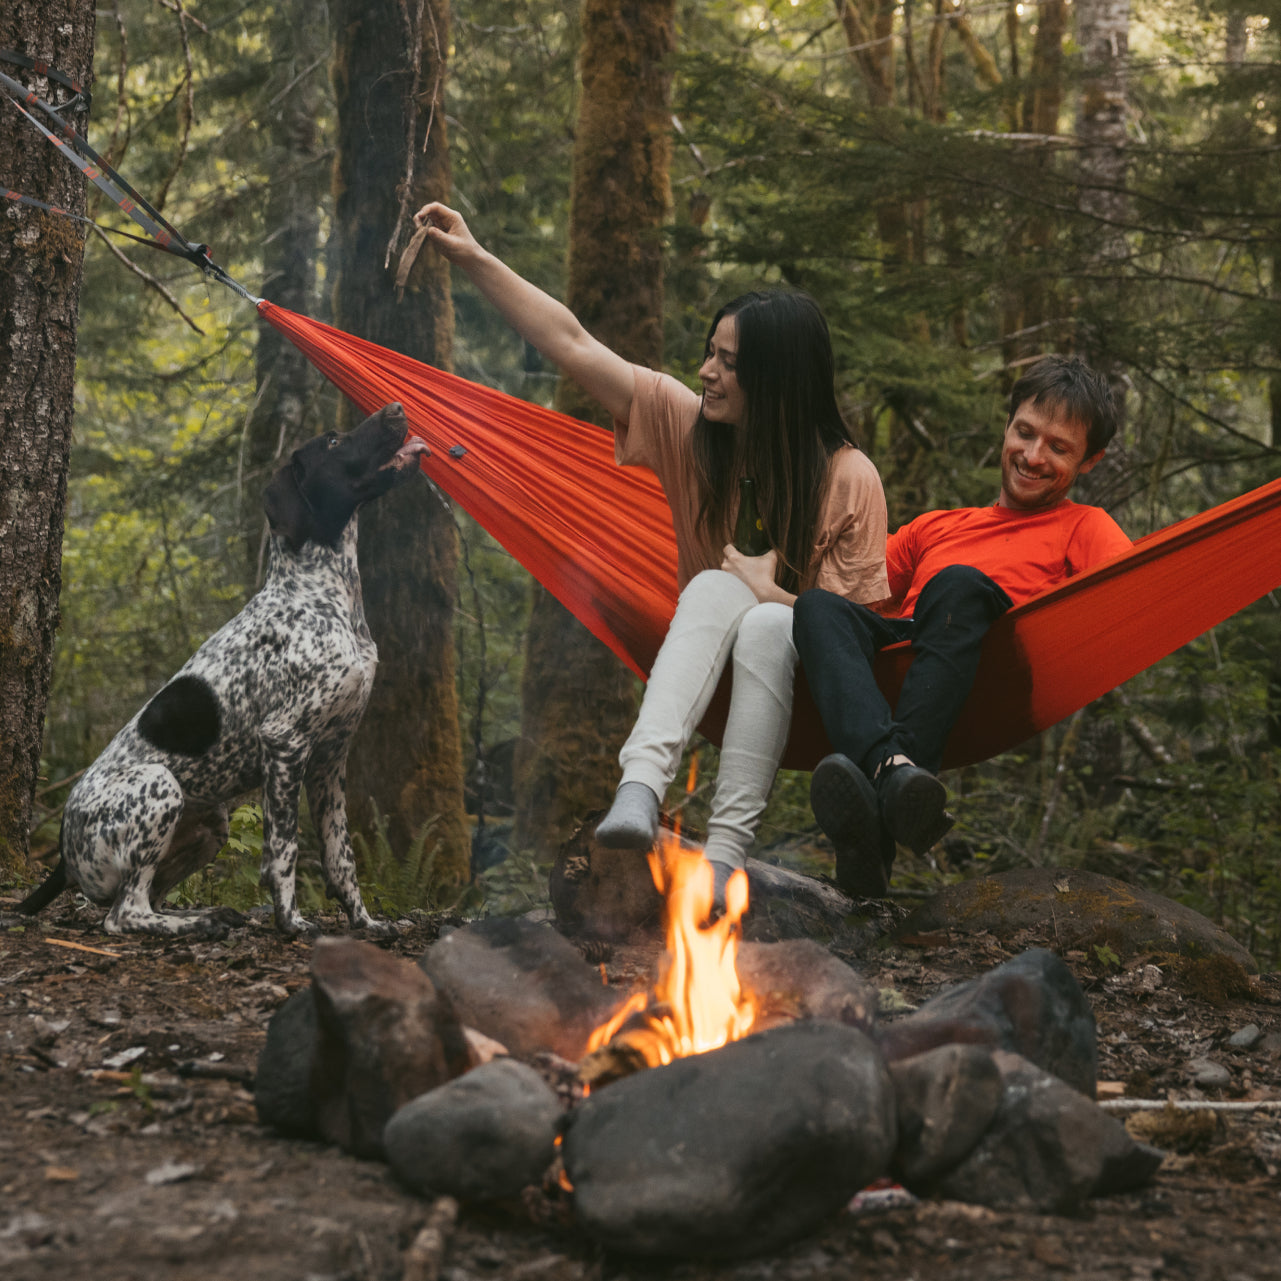 A couple in a hammock having fun with their dog in the nature